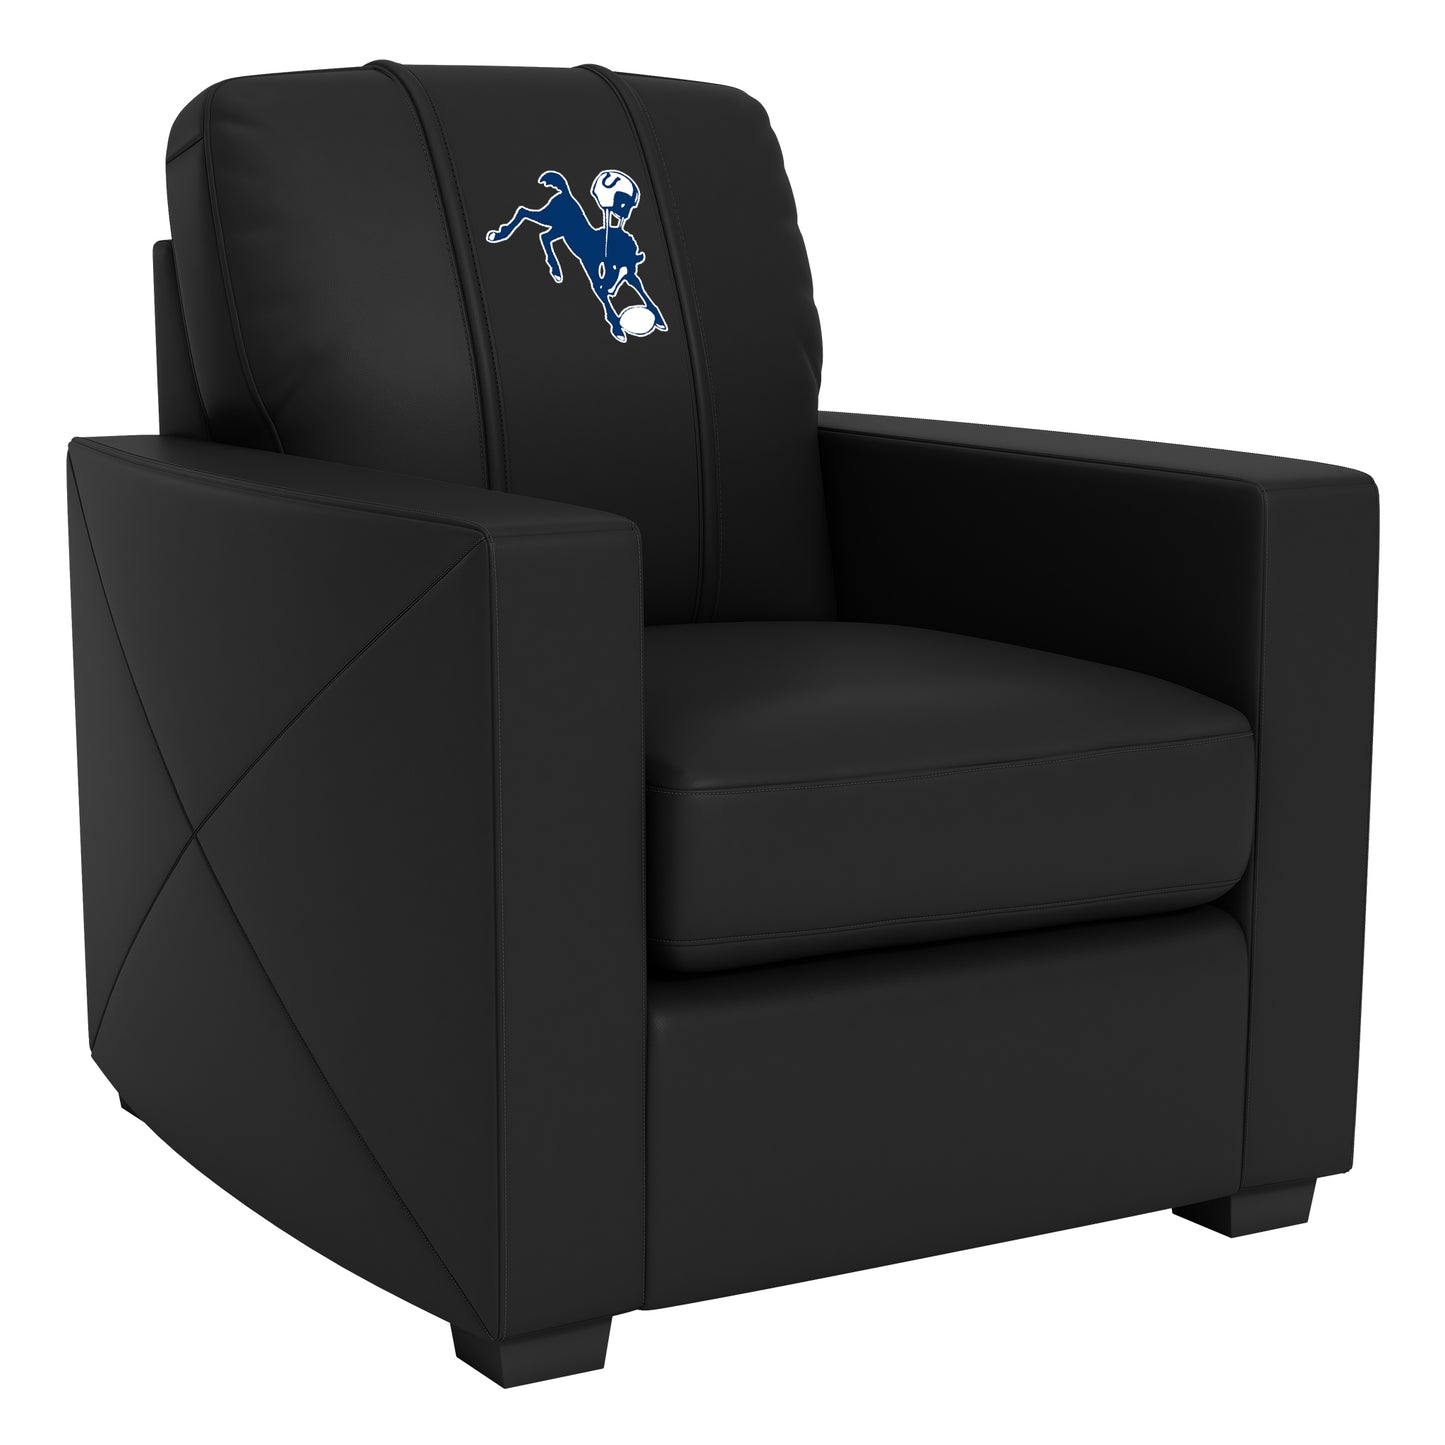 Silver Club Chair with Indianapolis Colts Classic Logo